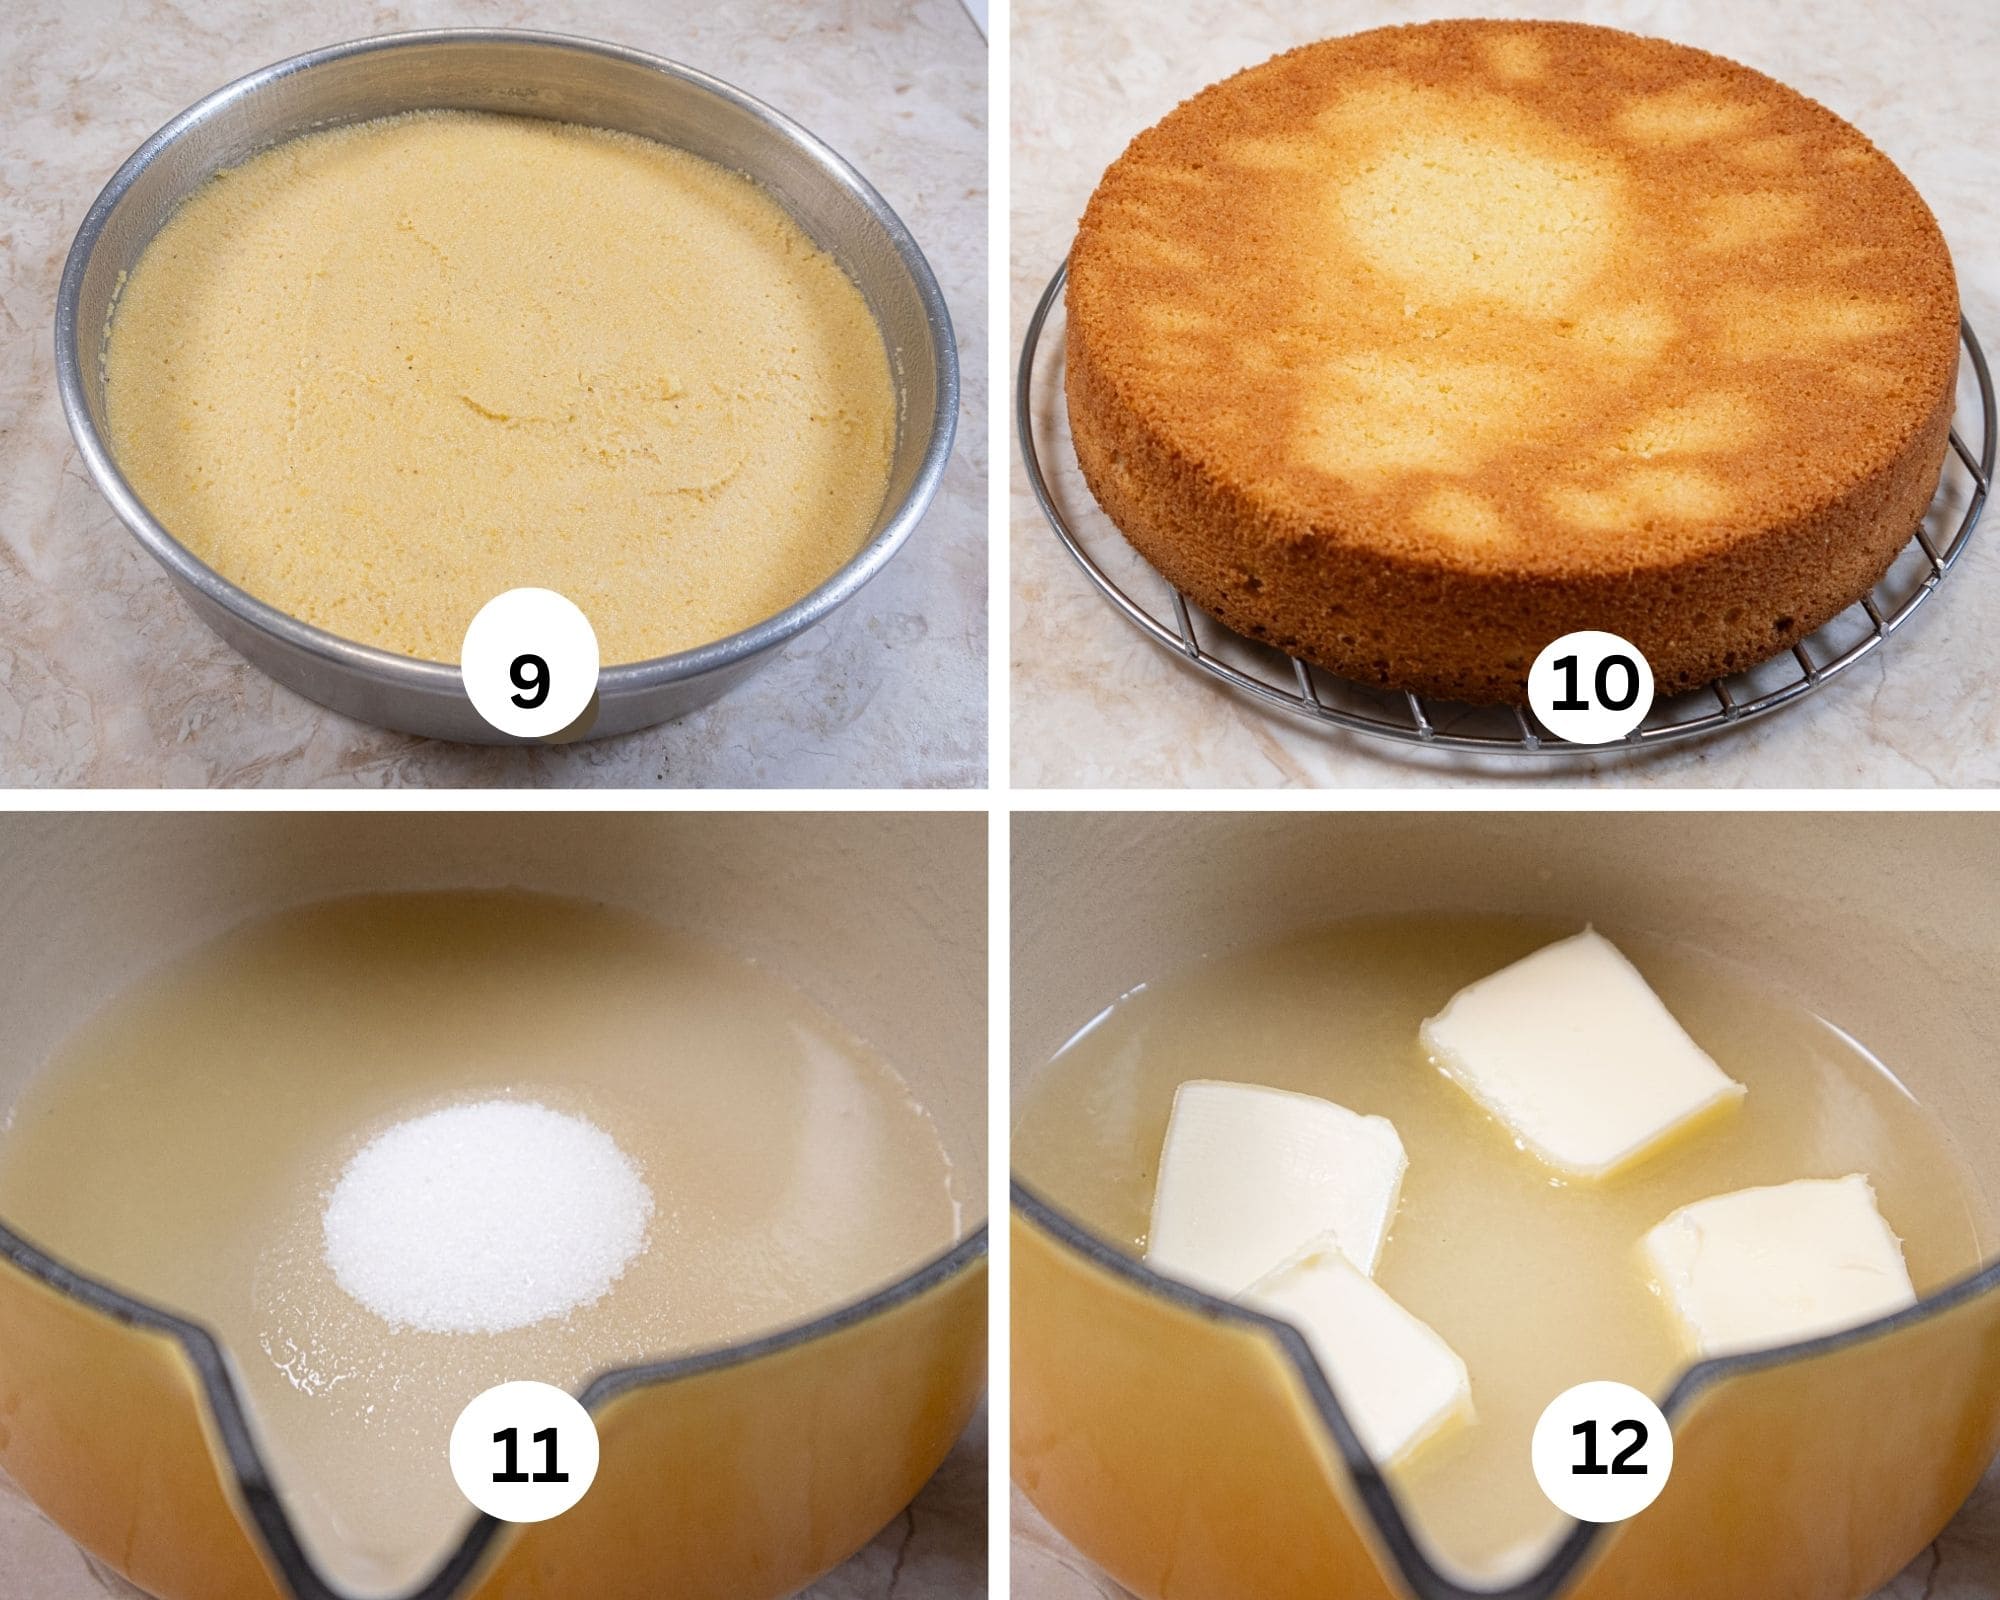 The third collage shows the batter smoothed int he baking pan, the cake baked and turned upside down, the lemon juice and sugar in a small pan and the butter added.